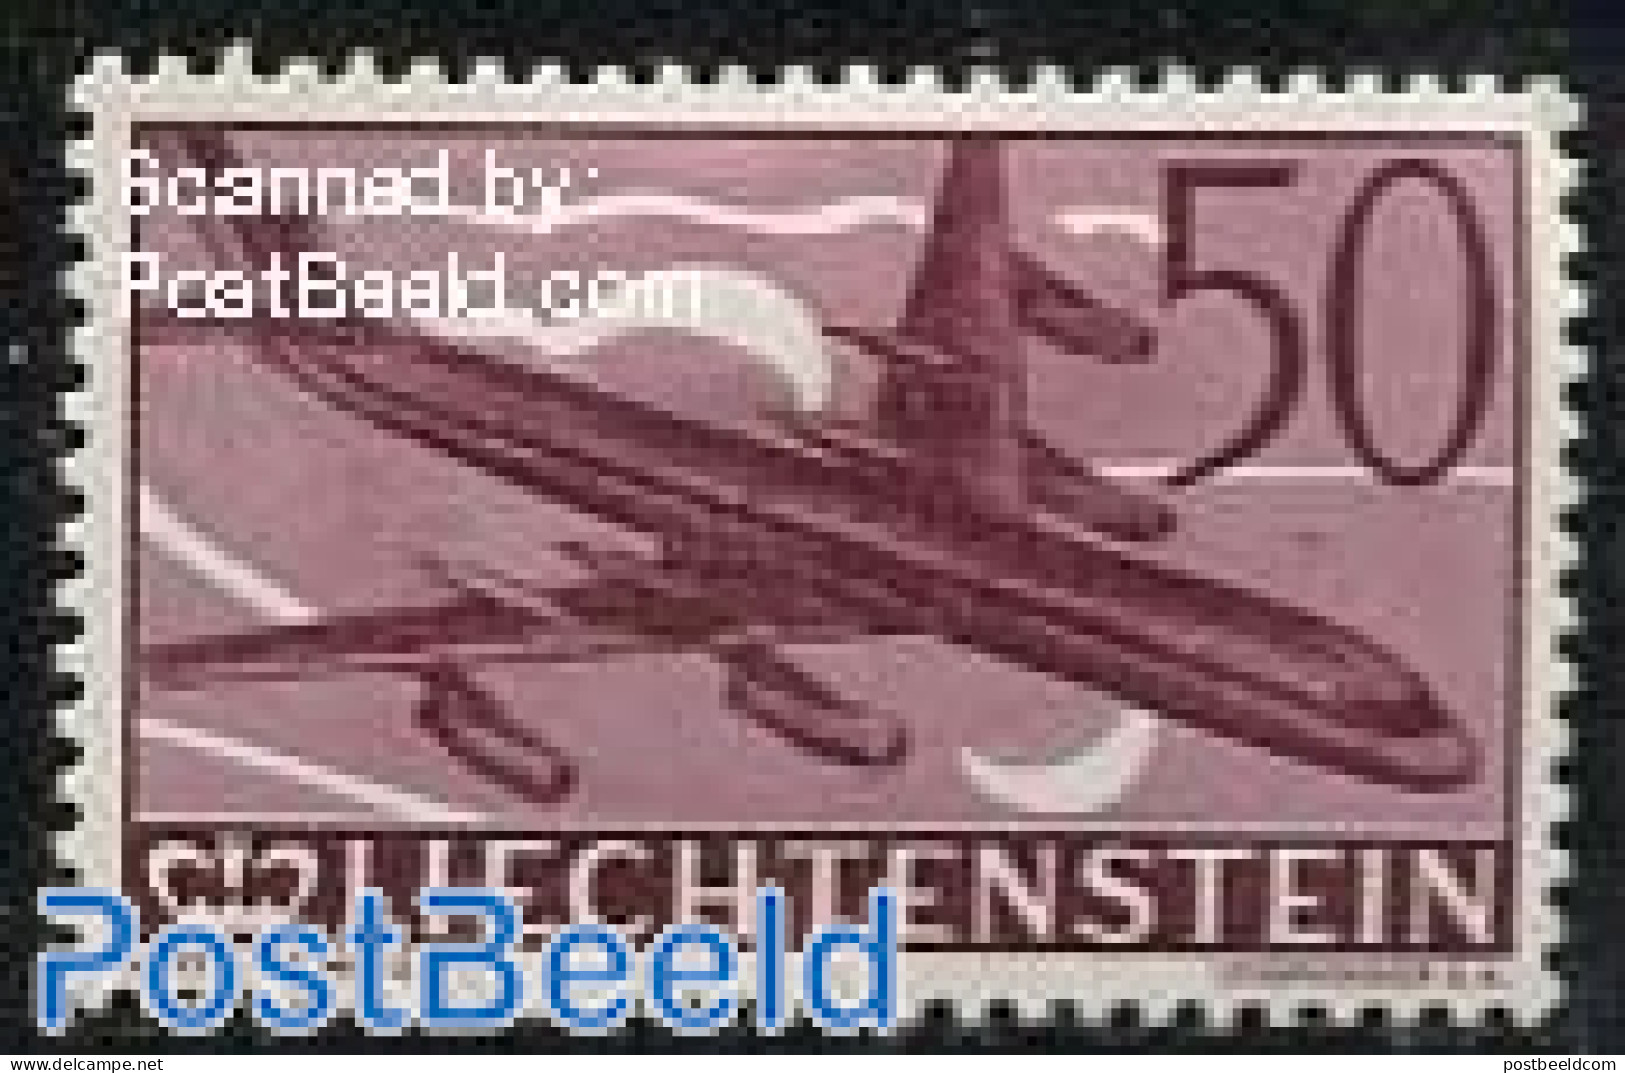 Liechtenstein 1960 50Rp, Stamp Out Of Set, Unused (hinged), Transport - Aircraft & Aviation - Unused Stamps